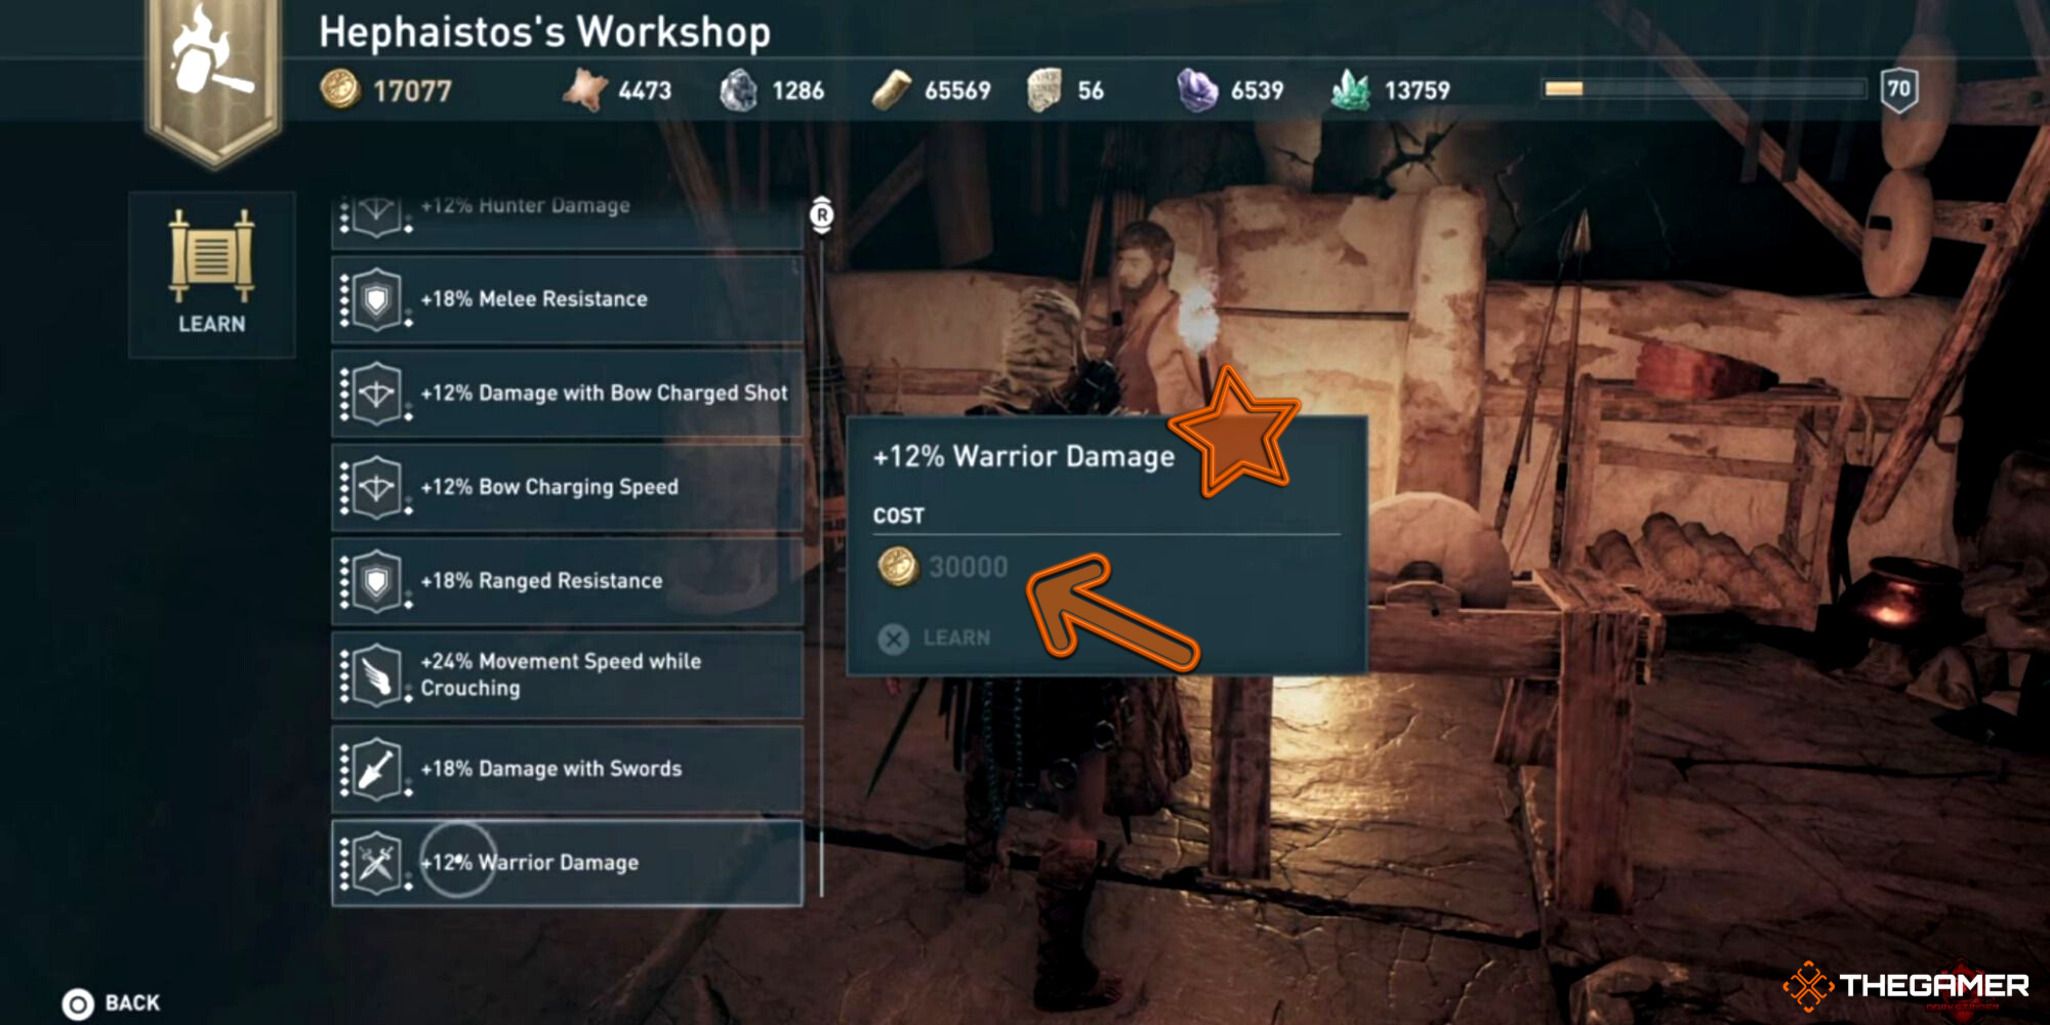 A screenshot showing the Warrior Damage boost at Hepahistos's Workshop.